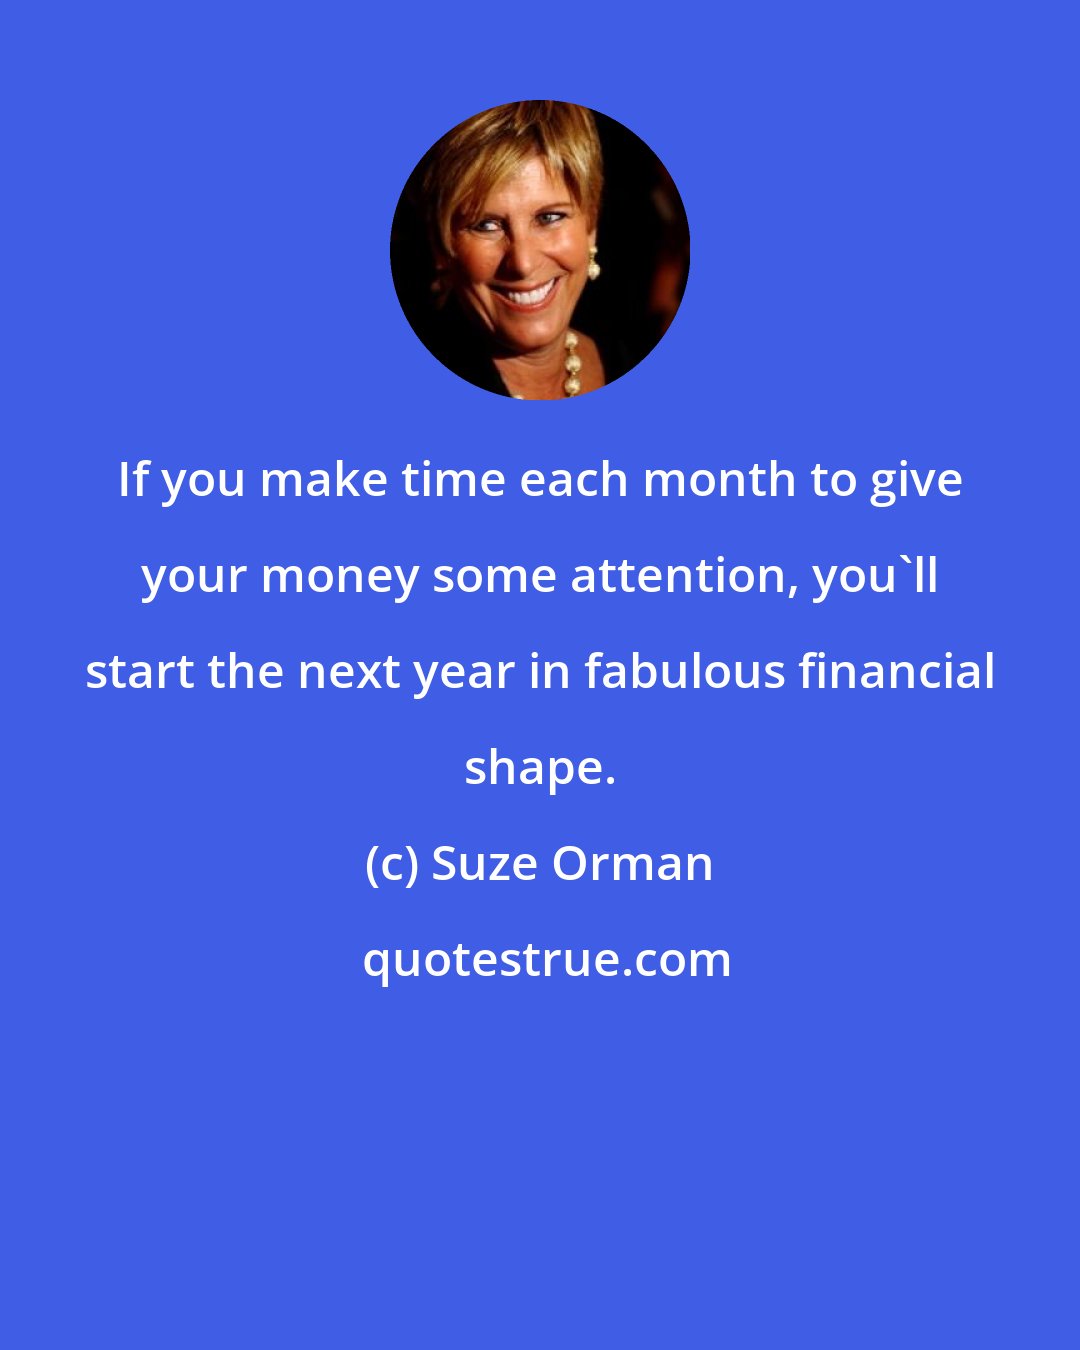 Suze Orman: If you make time each month to give your money some attention, you'll start the next year in fabulous financial shape.